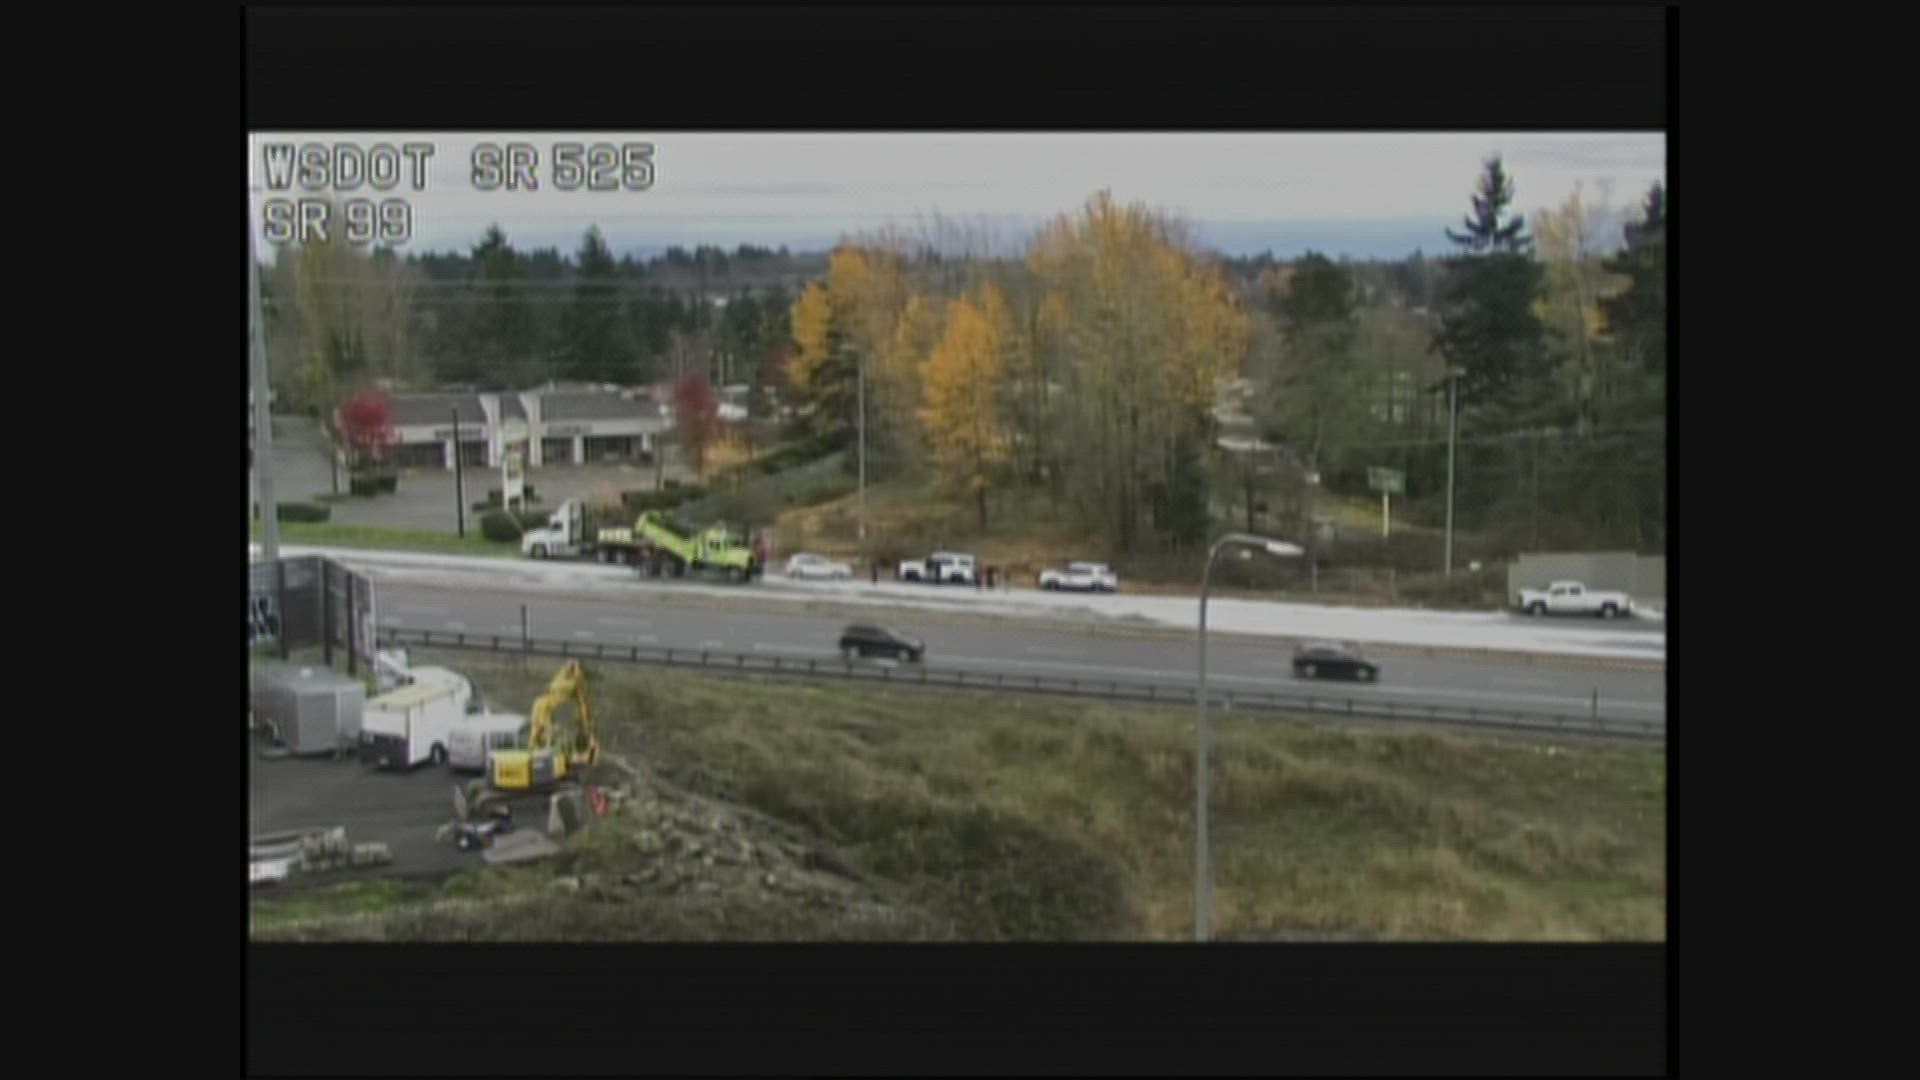 The northbound lanes of SR 99 in Lynnwood were blocked after paint spilled on the road.